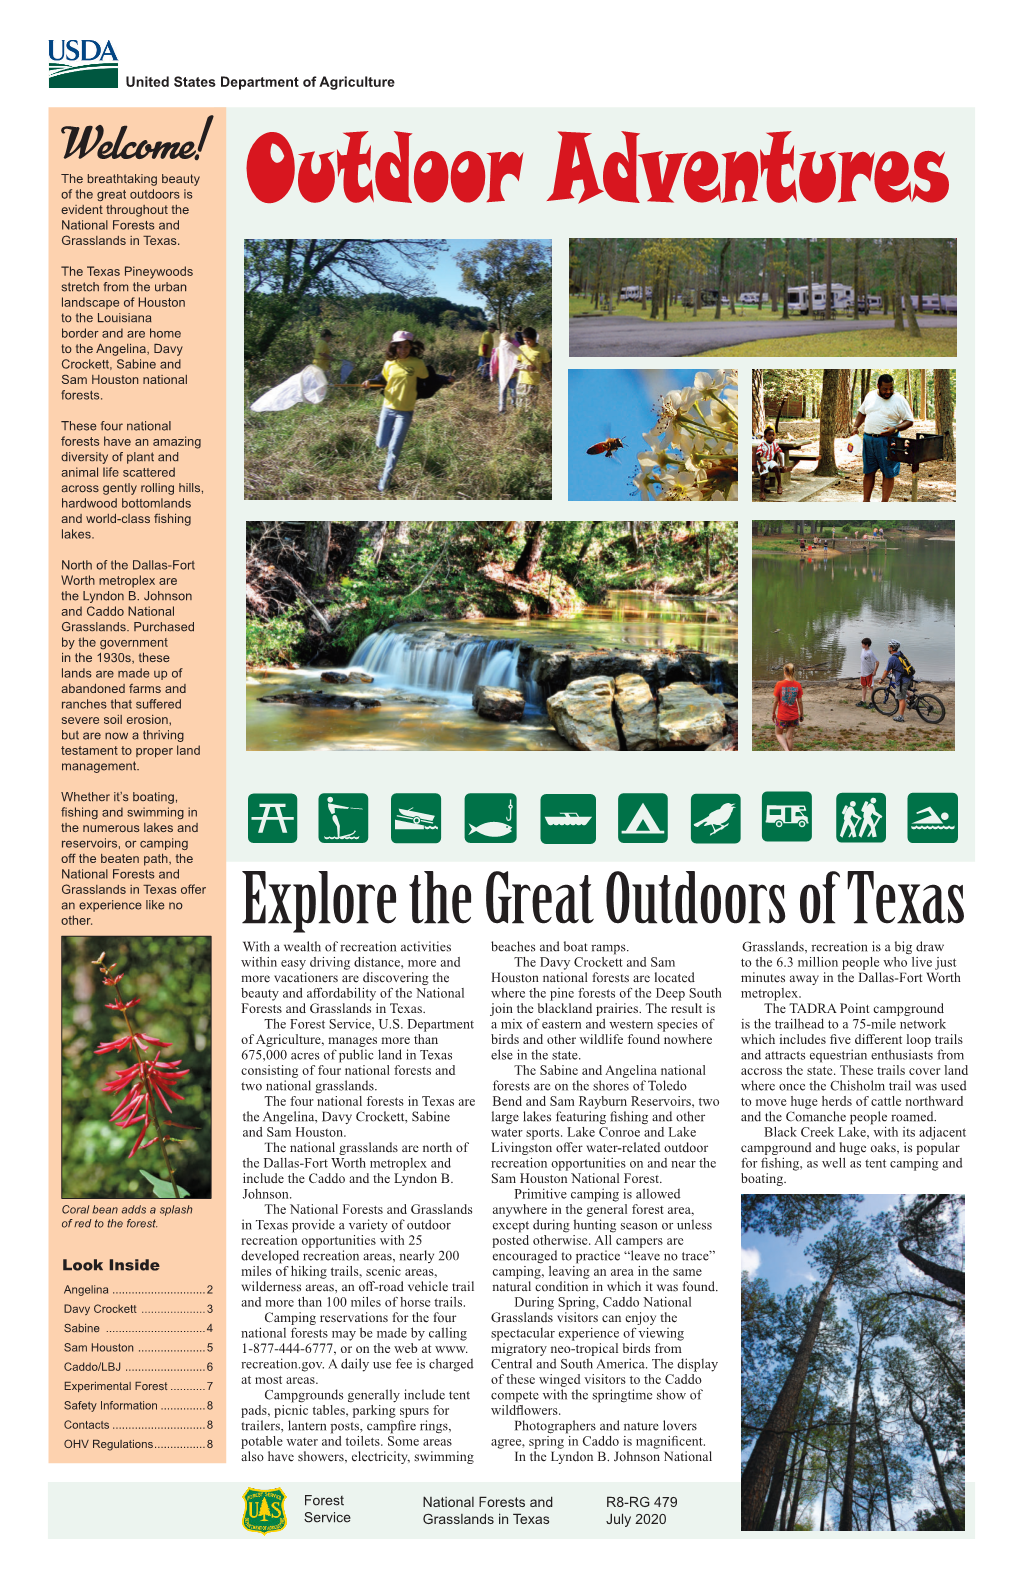 Explore the Great Outdoors of Texas with a Wealth of Recreation Activities Beaches and Boat Ramps